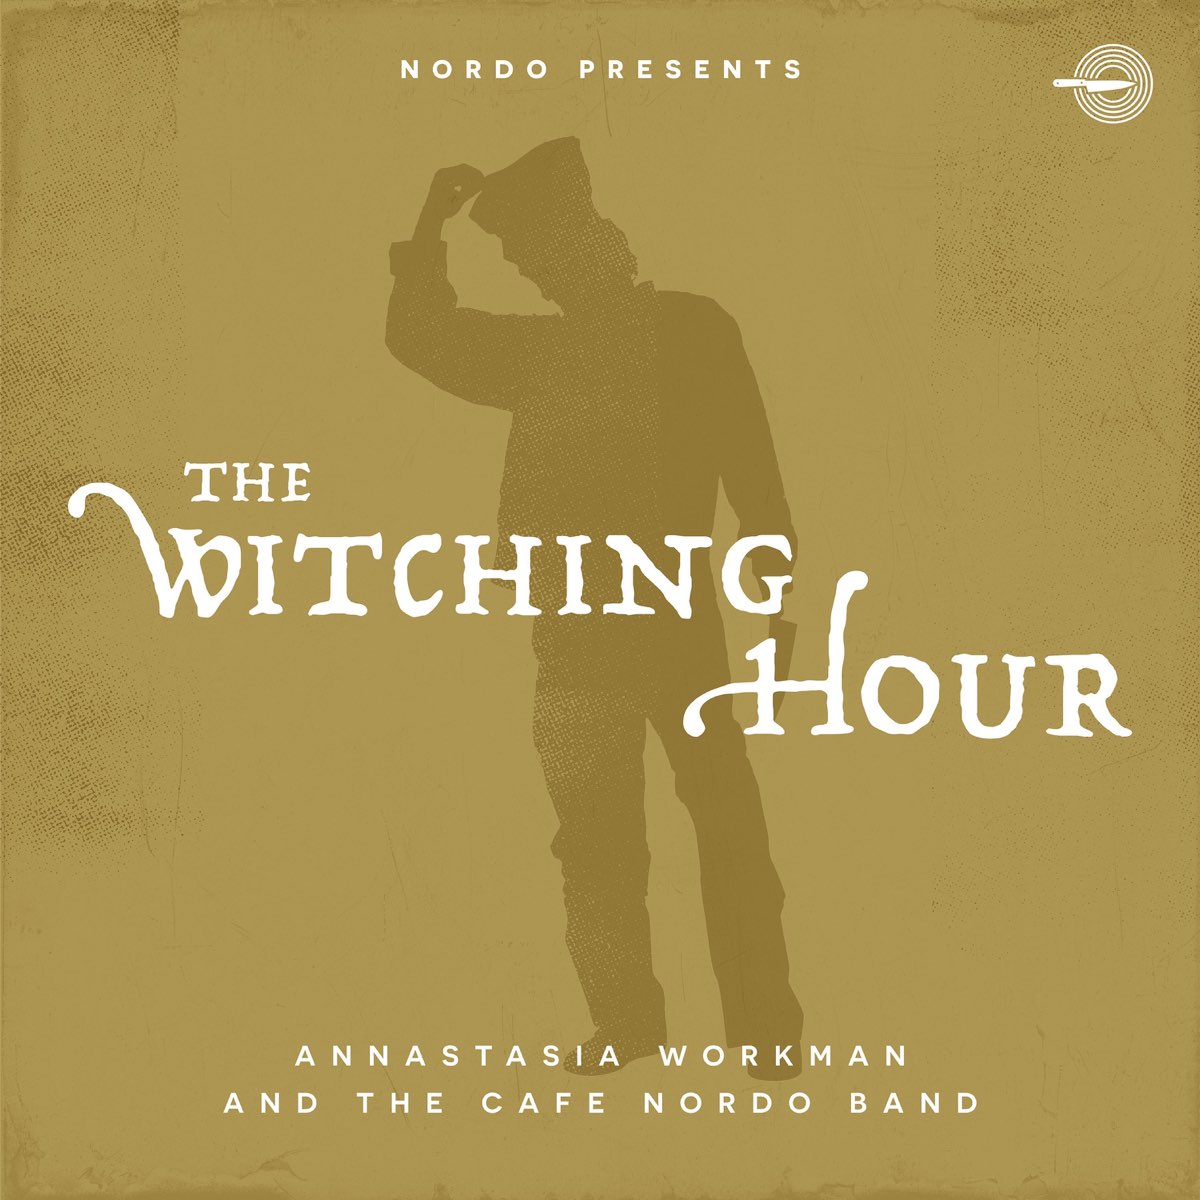 Секунда час песня. Witching hour группа. "The Witching hour" of Porcelain. Nordo mp3. The Witching hour Bell.